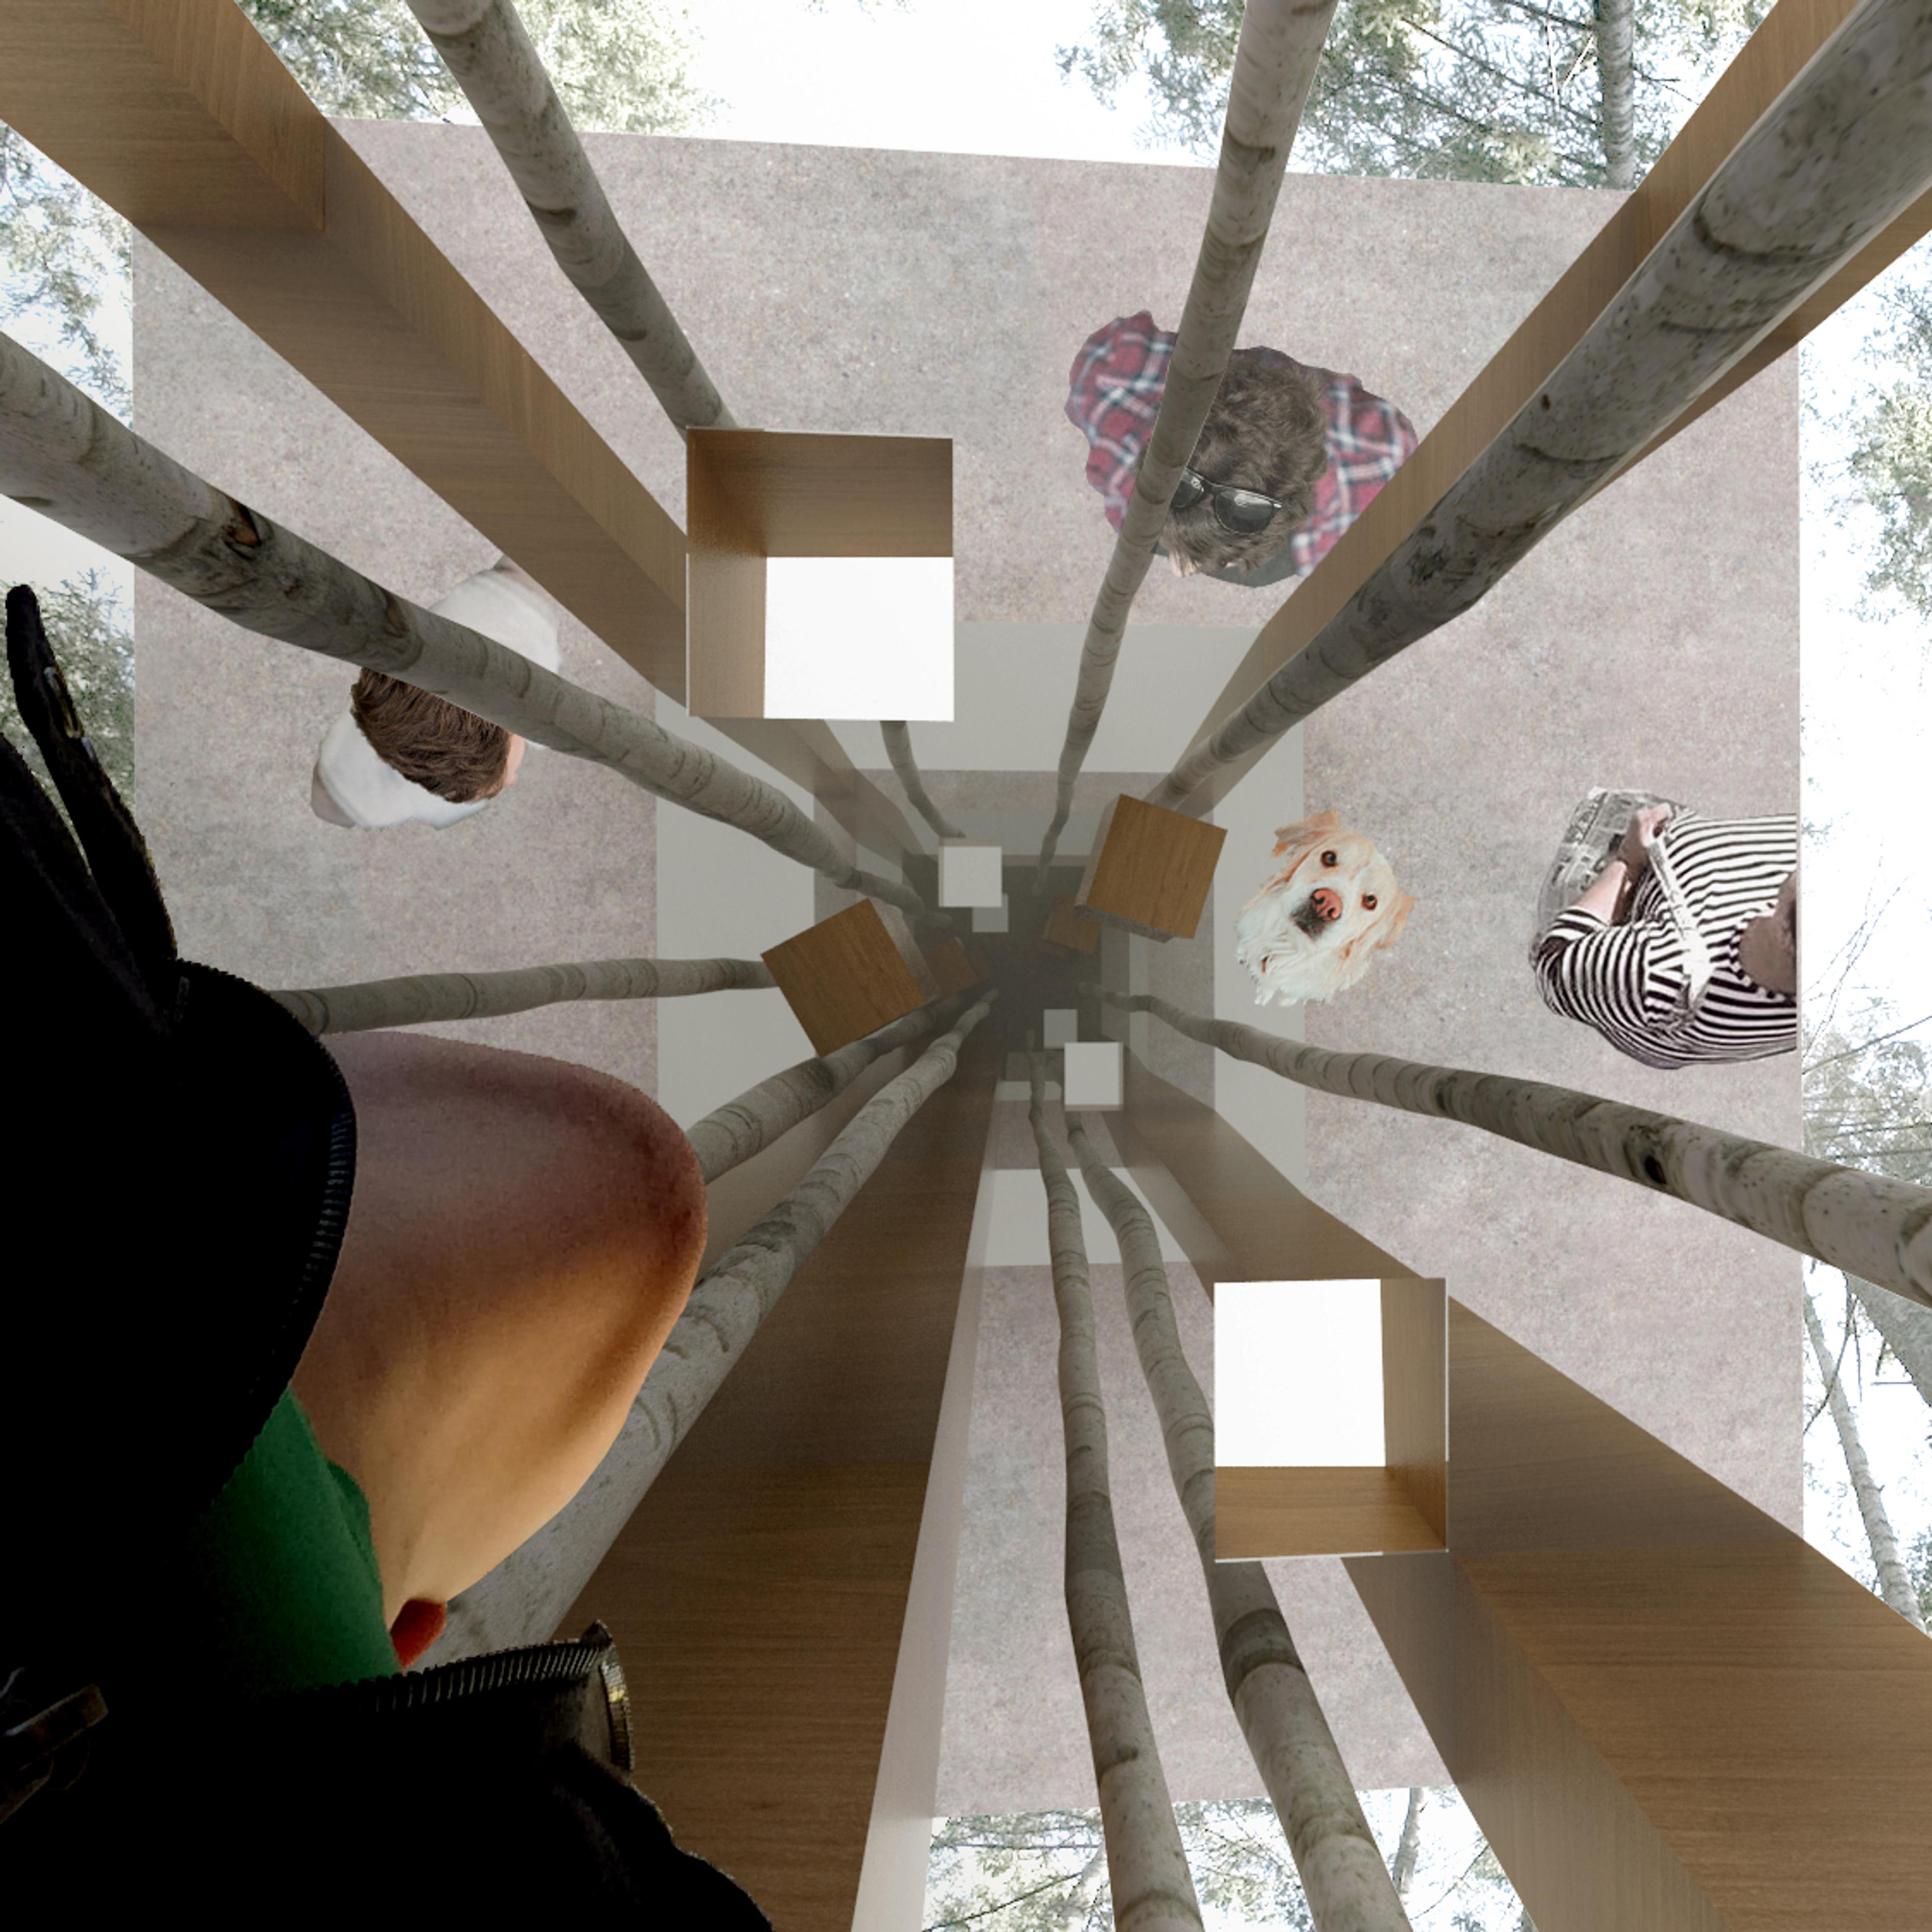 Architectural rendering inside art installation resembling a forest looking up